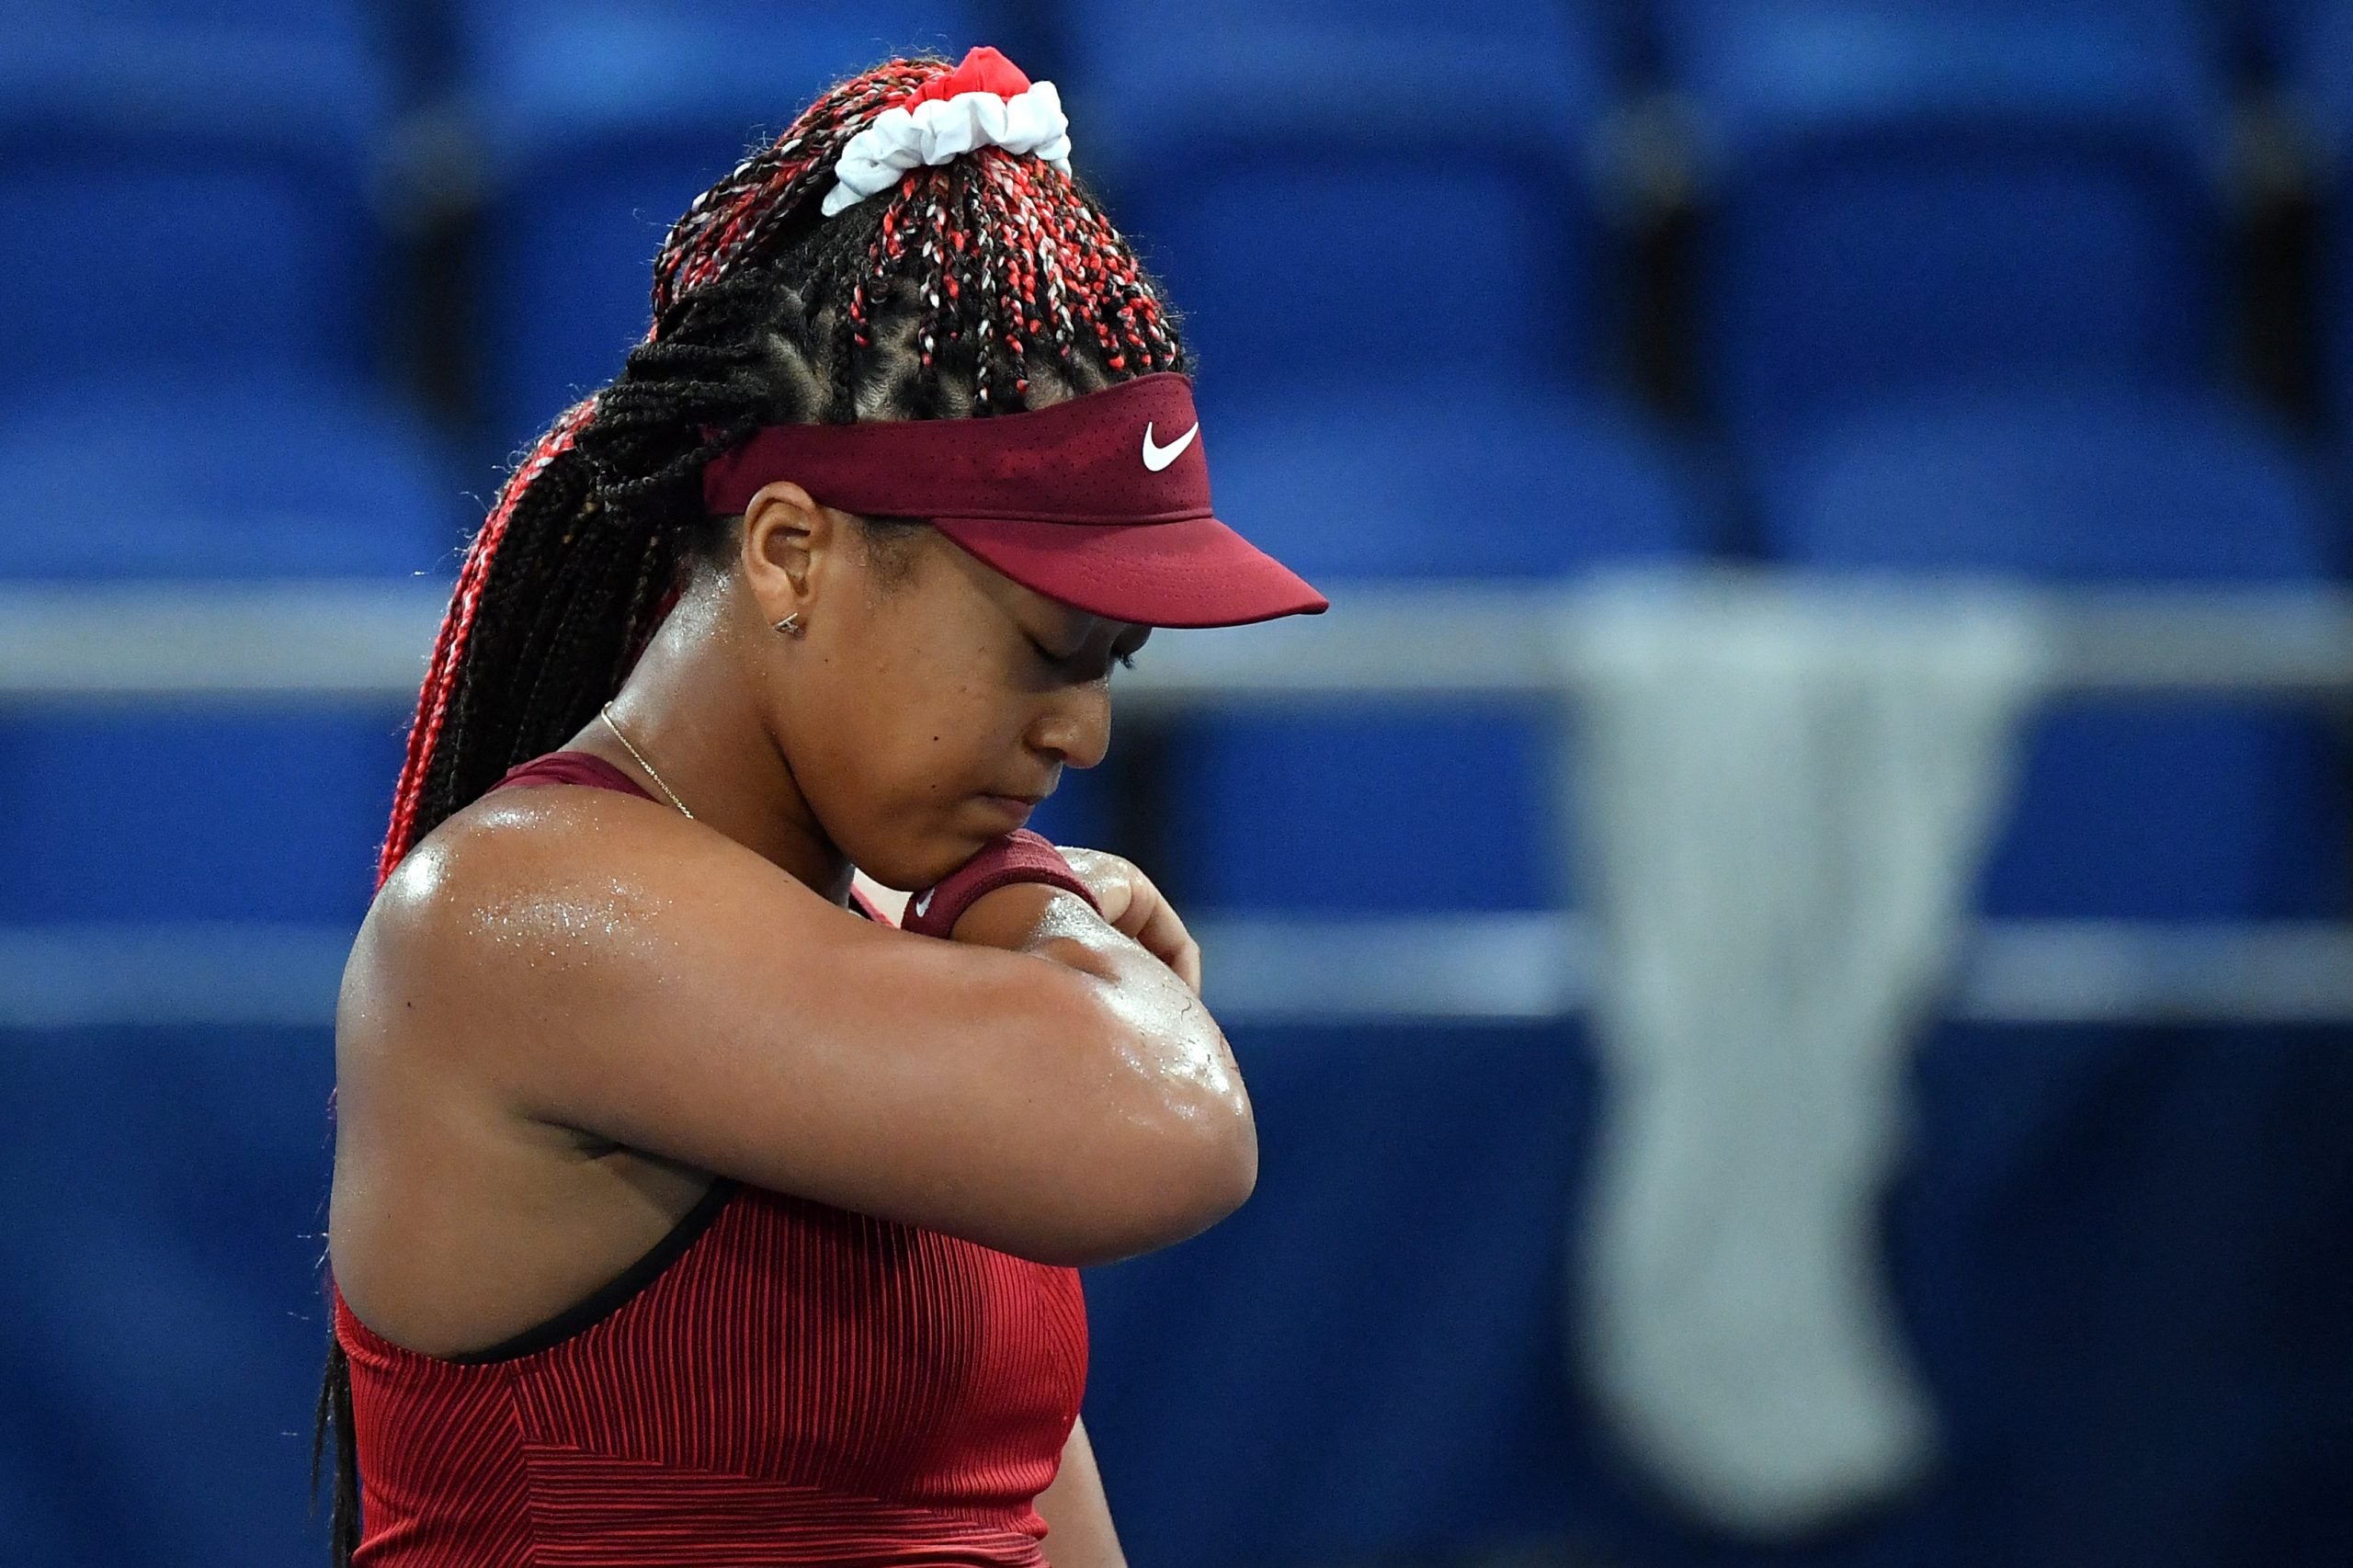 Naomi Osaka Cries After Journalist Asks A Question Her Rep Says Was Meant 'To Intimidate'